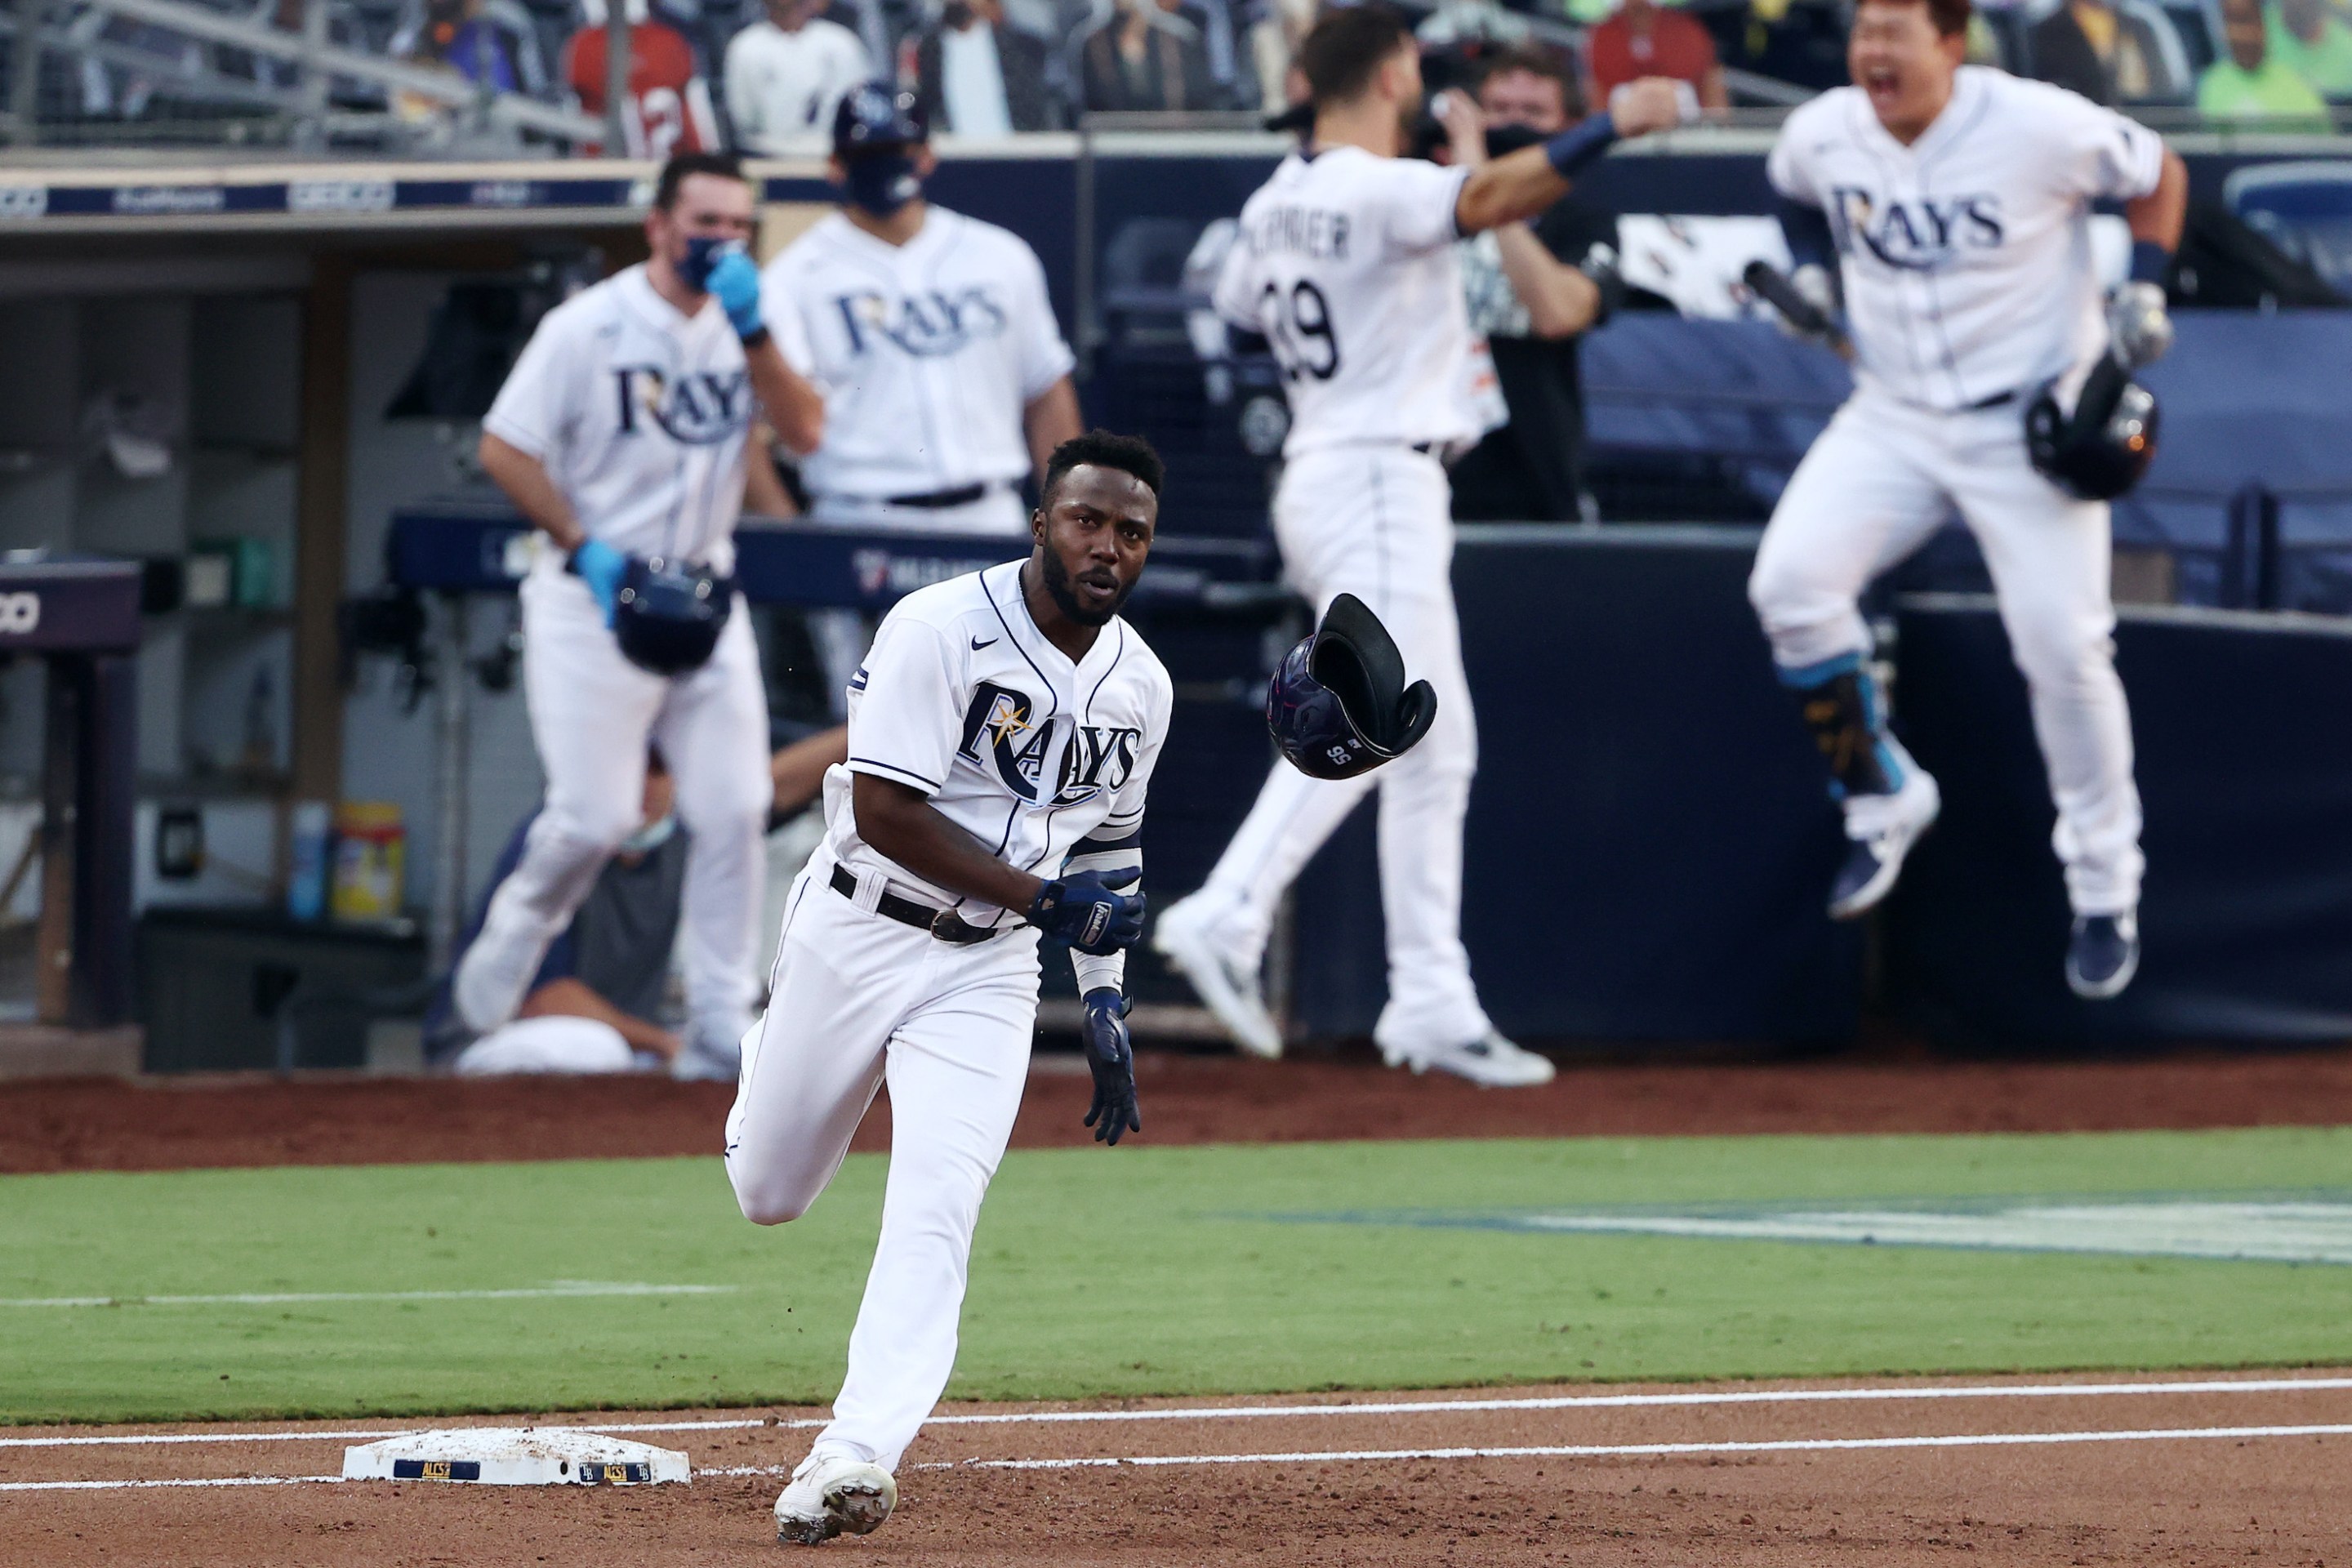 Randy Arozarena of the Tampa Bay Rays rounds the bases after hitting a home run in Game 7 of the ALCS